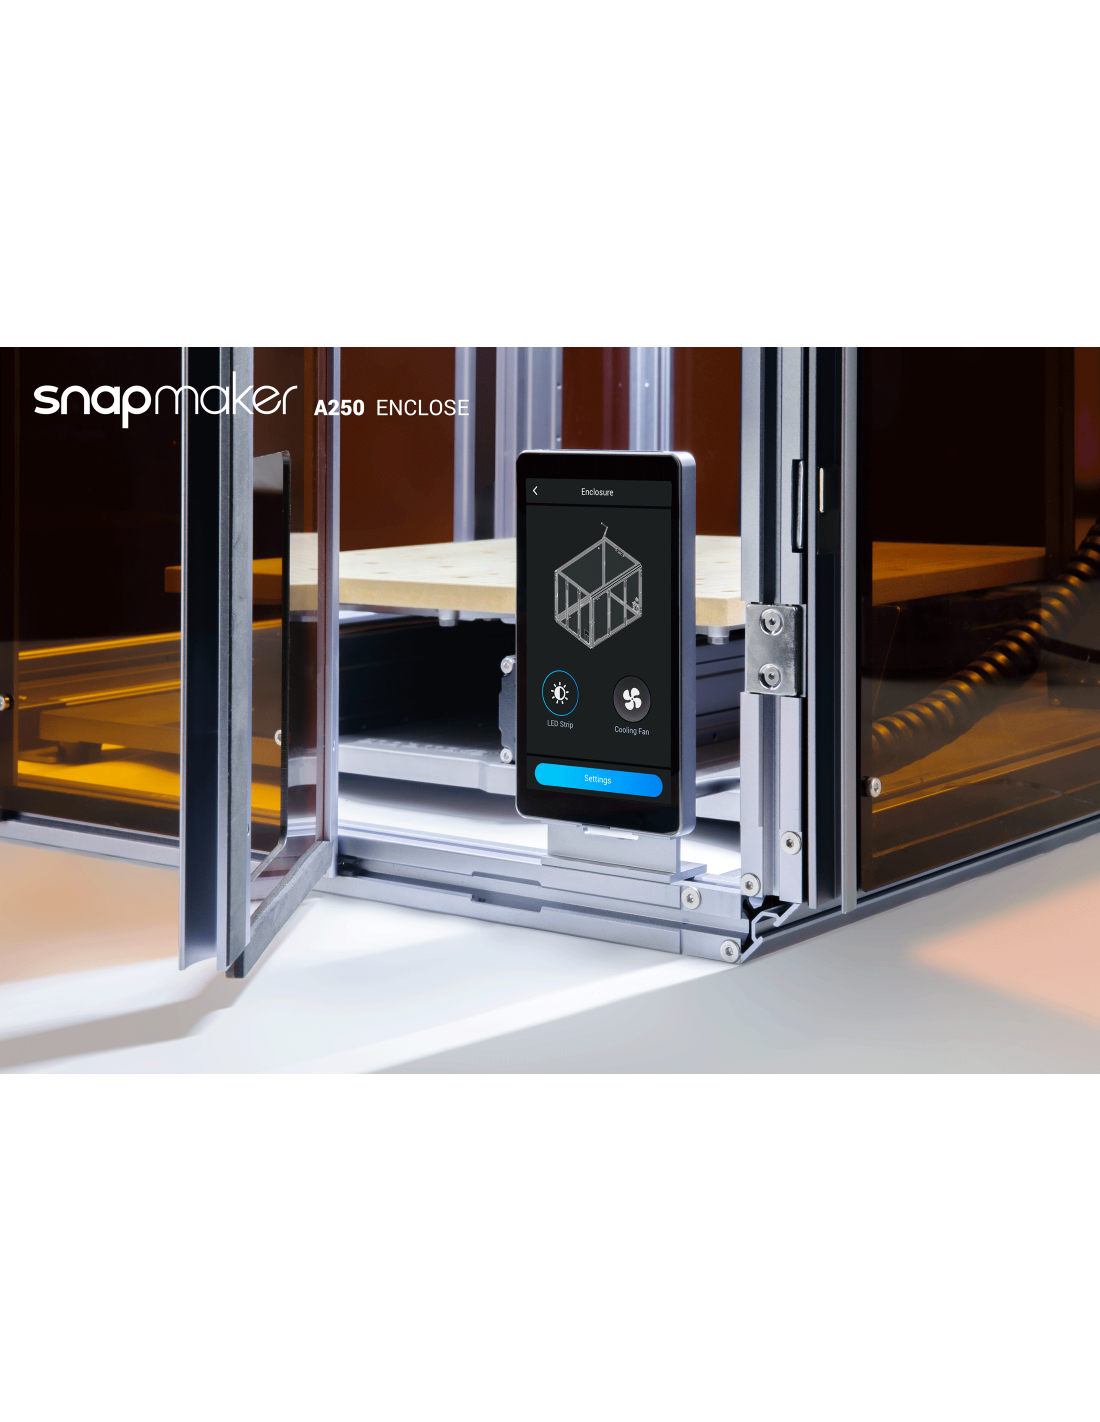 Snapmaker 2.0 3-in-1 3D Printer with A250T Enhanced version housing